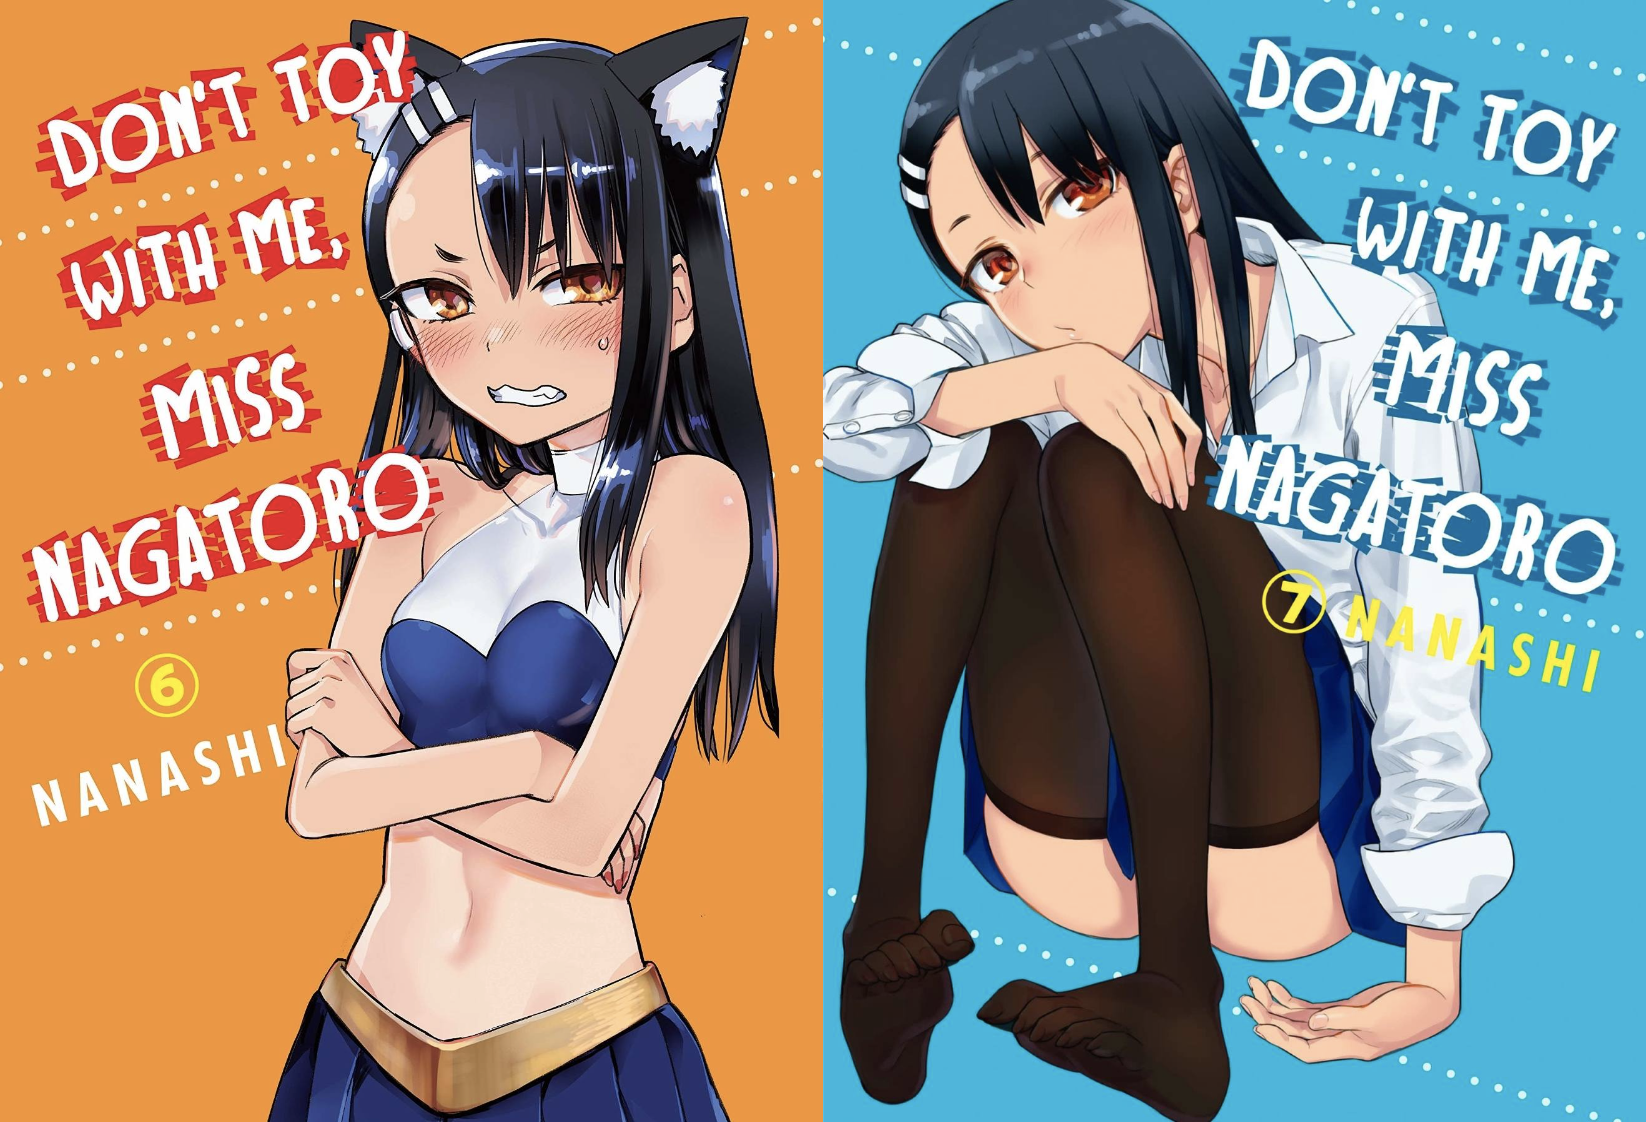 Don't Toy With Me Miss Nagatoro - New Famous Anime?